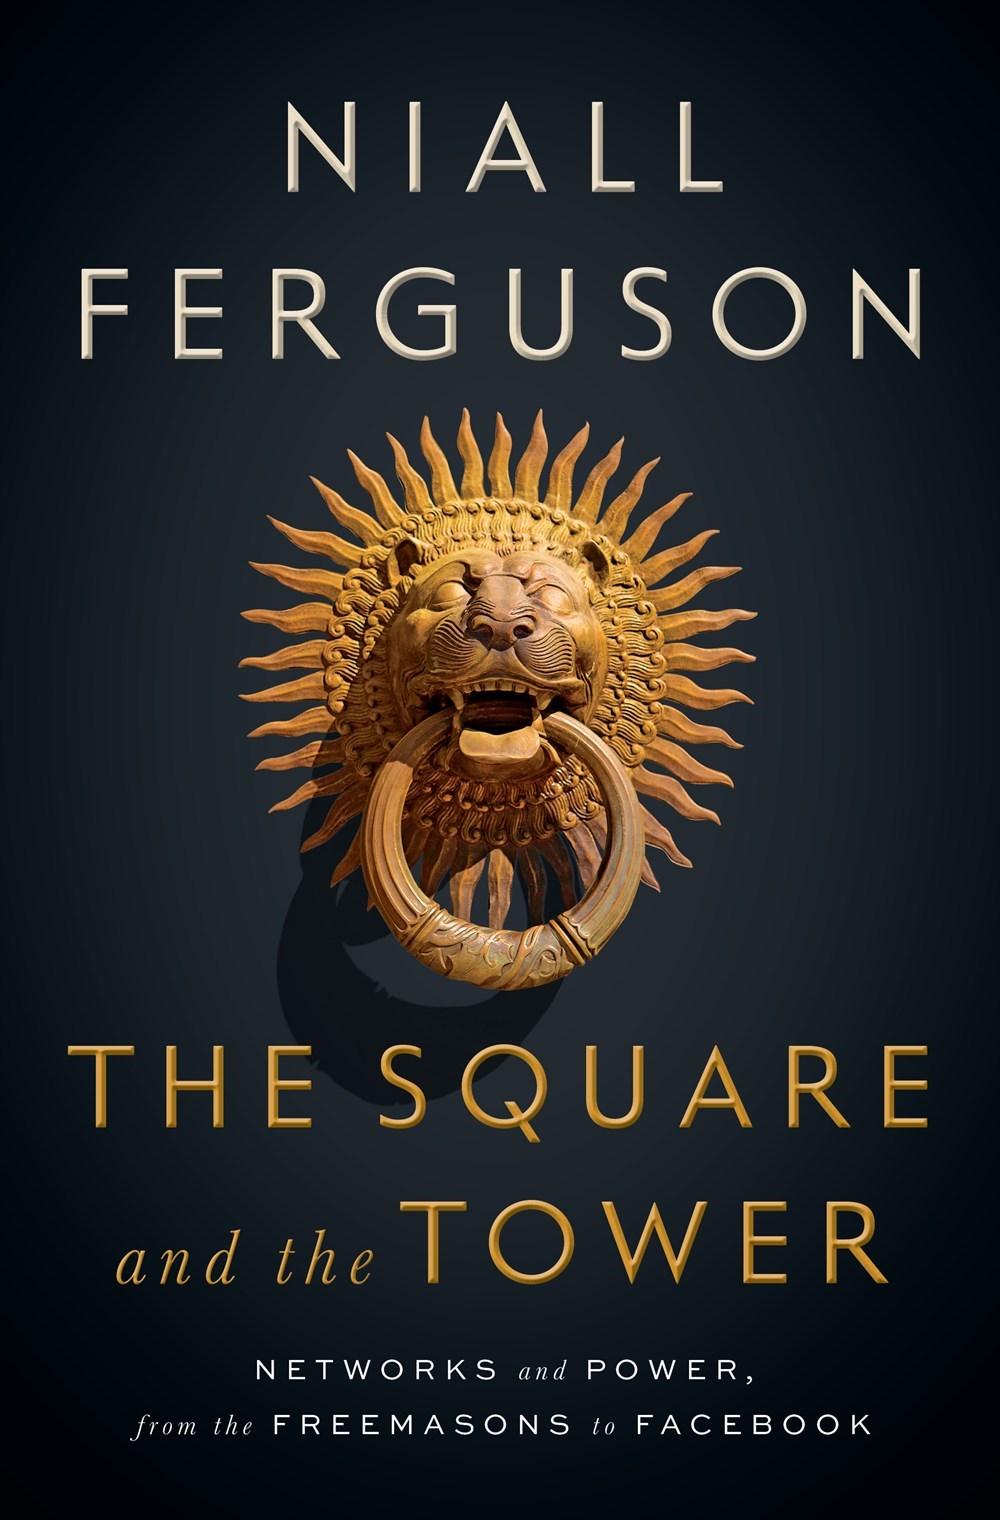 Square and the Tower: Networks and Power, from the Freemasons to Facebook